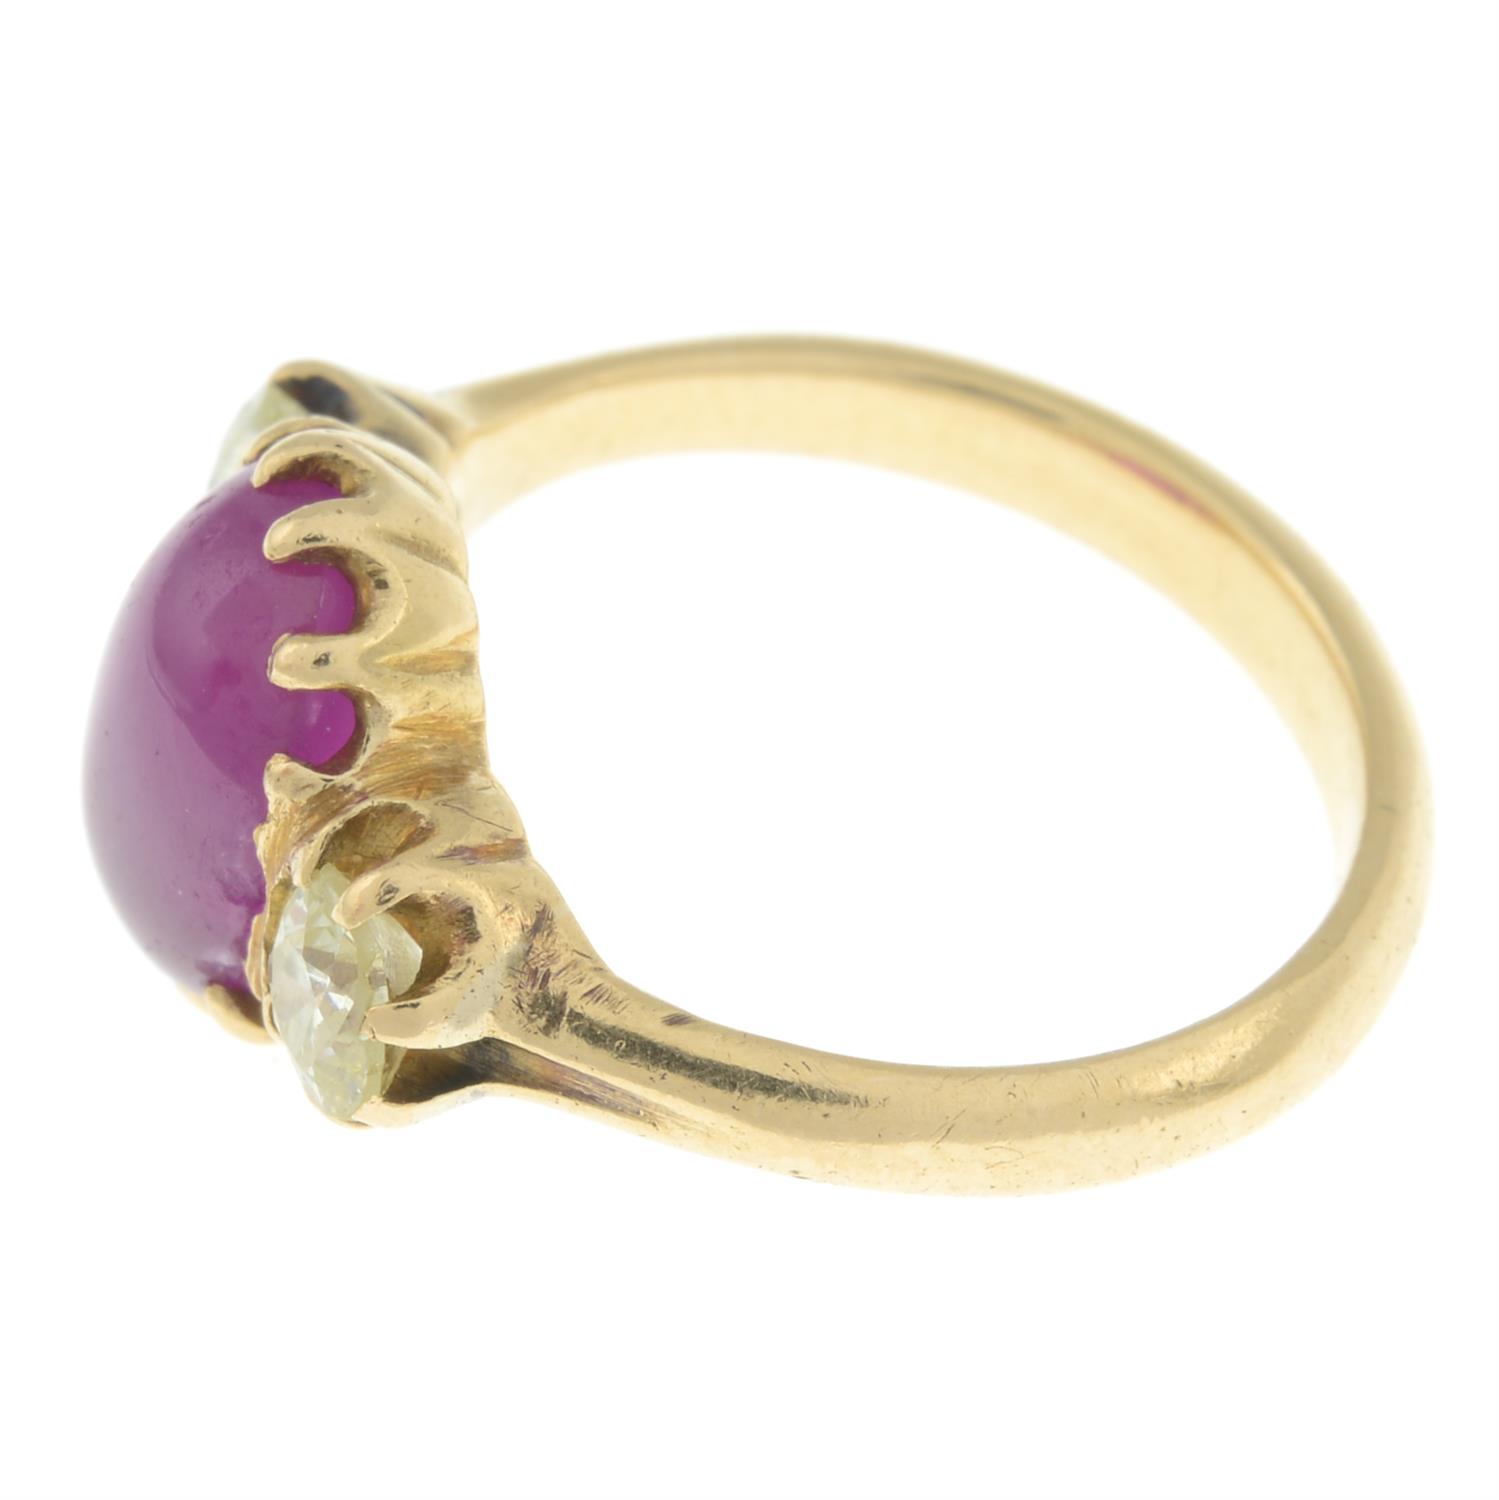 Late 19th century 18ct gold Burmese ruby and diamond ring - Image 4 of 5